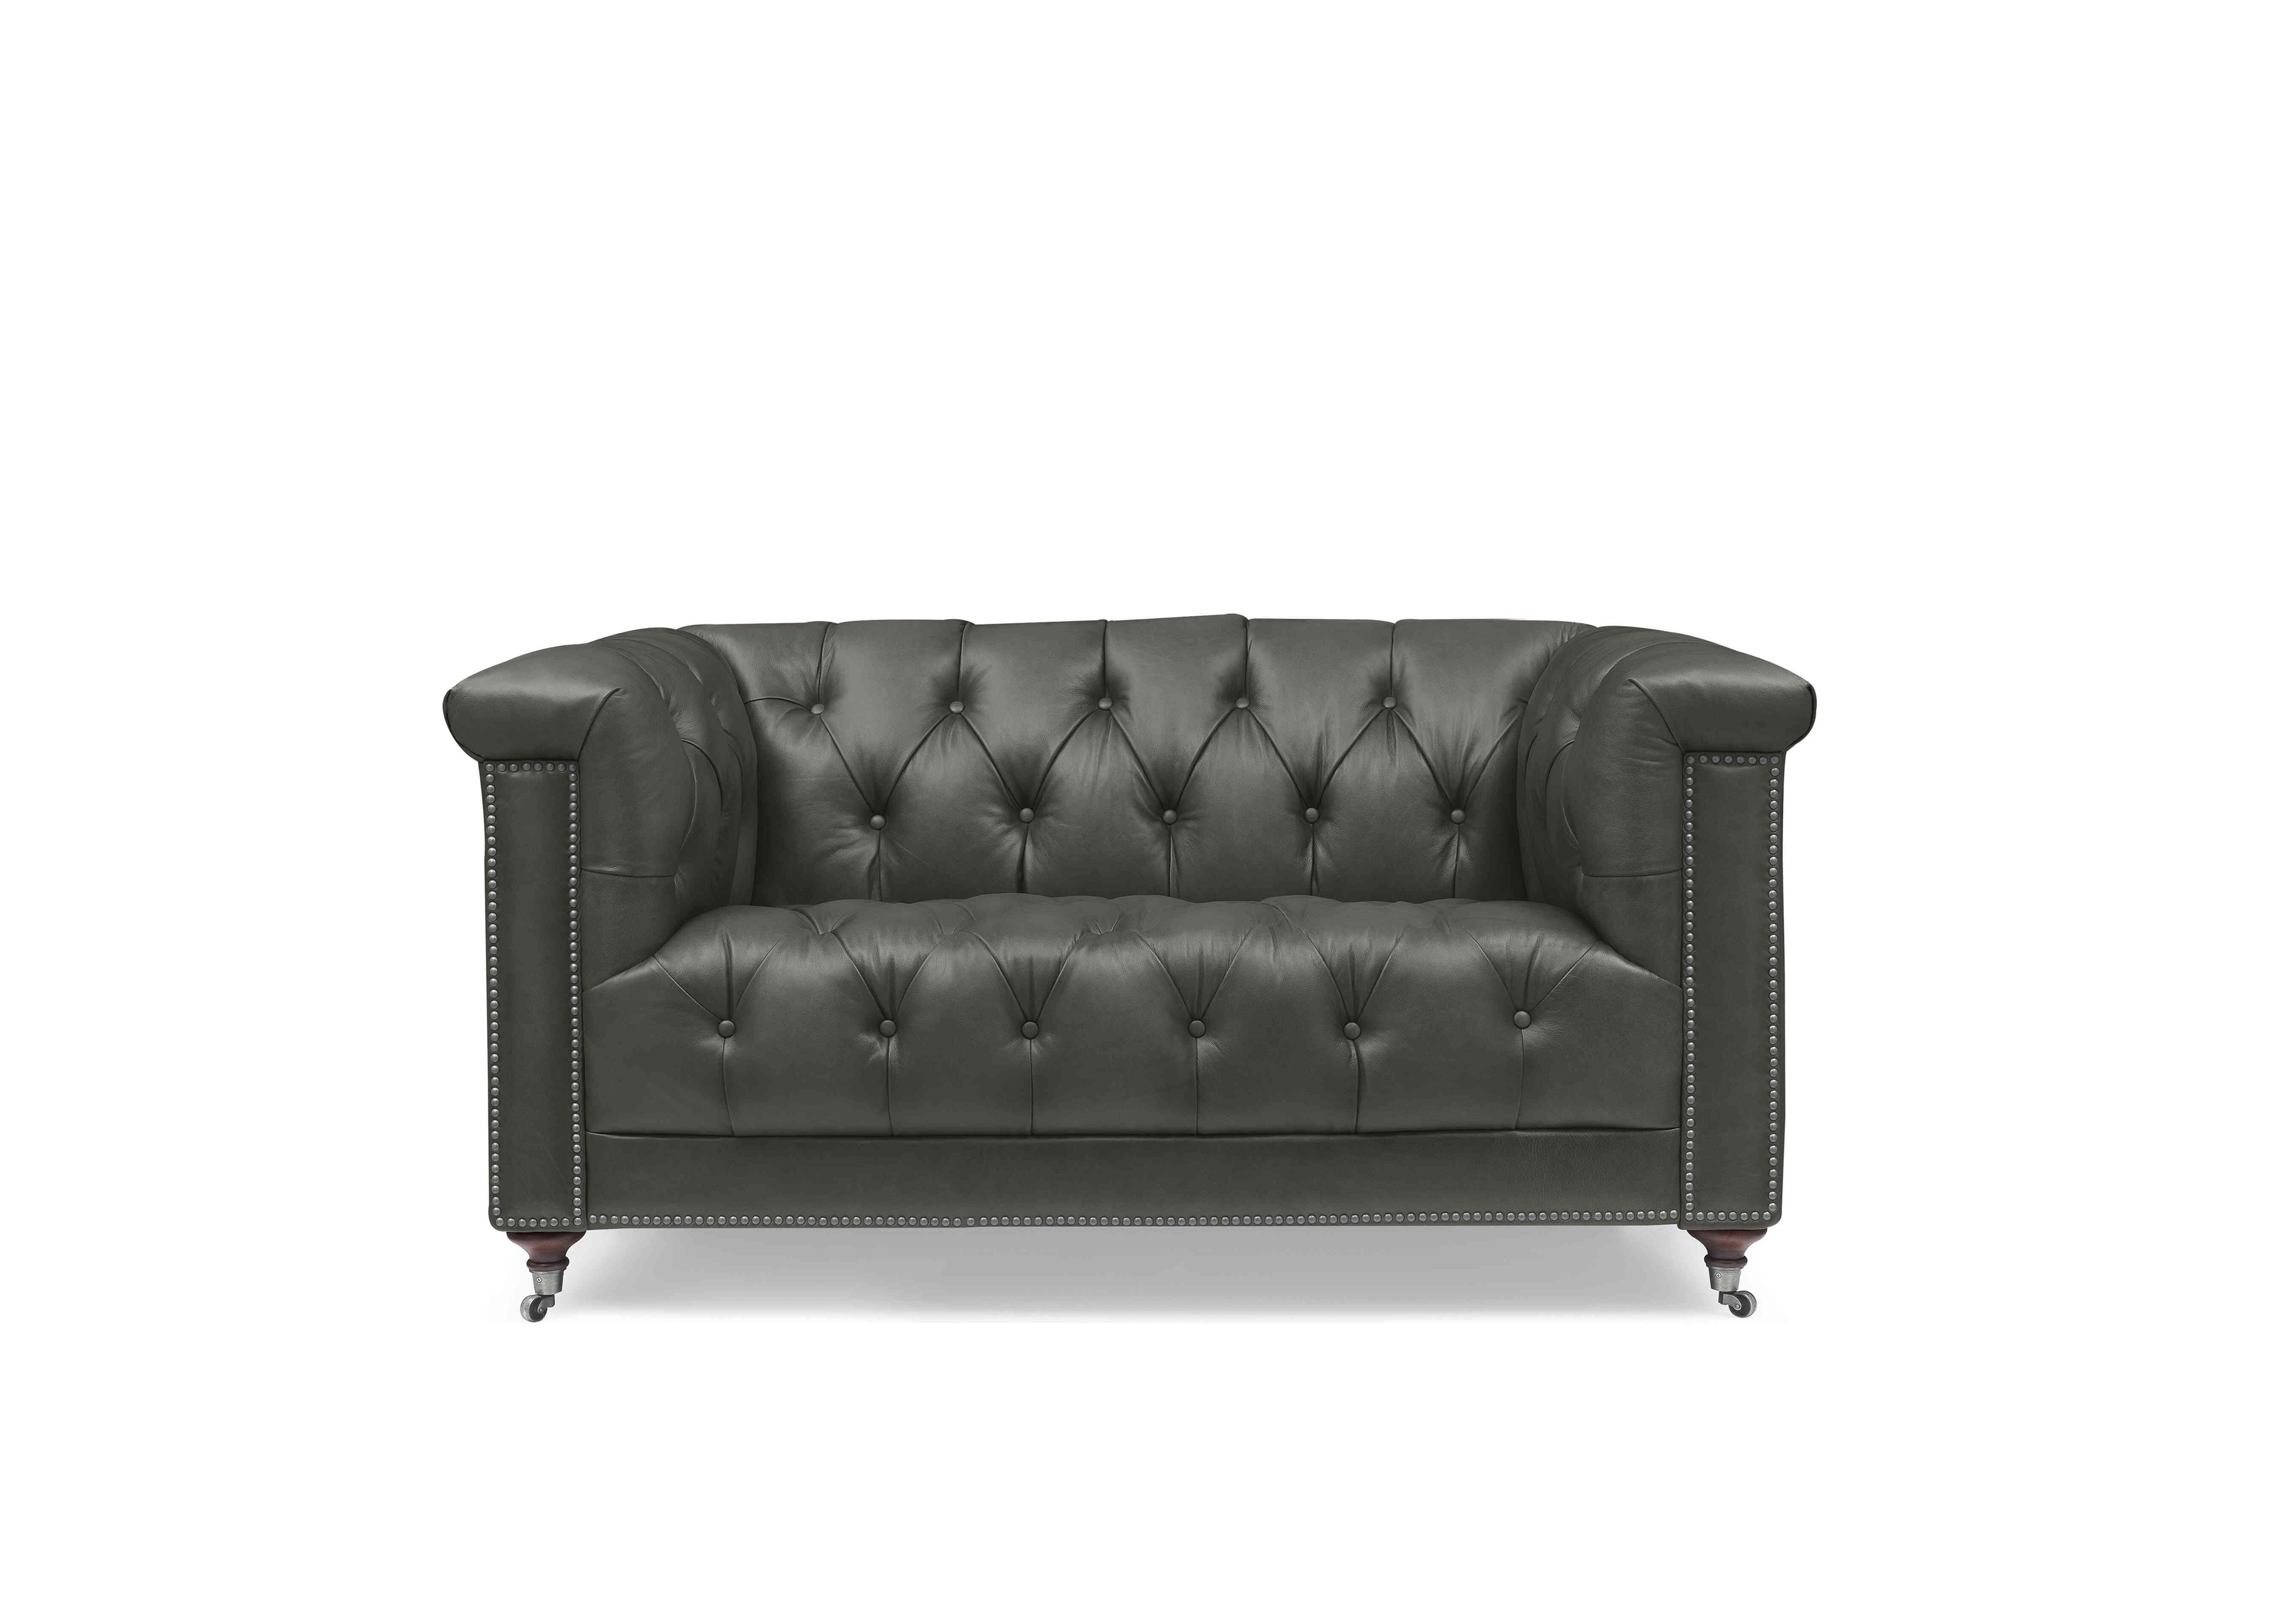 Wallace 2 Seater Leather Chesterfield Sofa in X3y2-1966ls Granite on Furniture Village